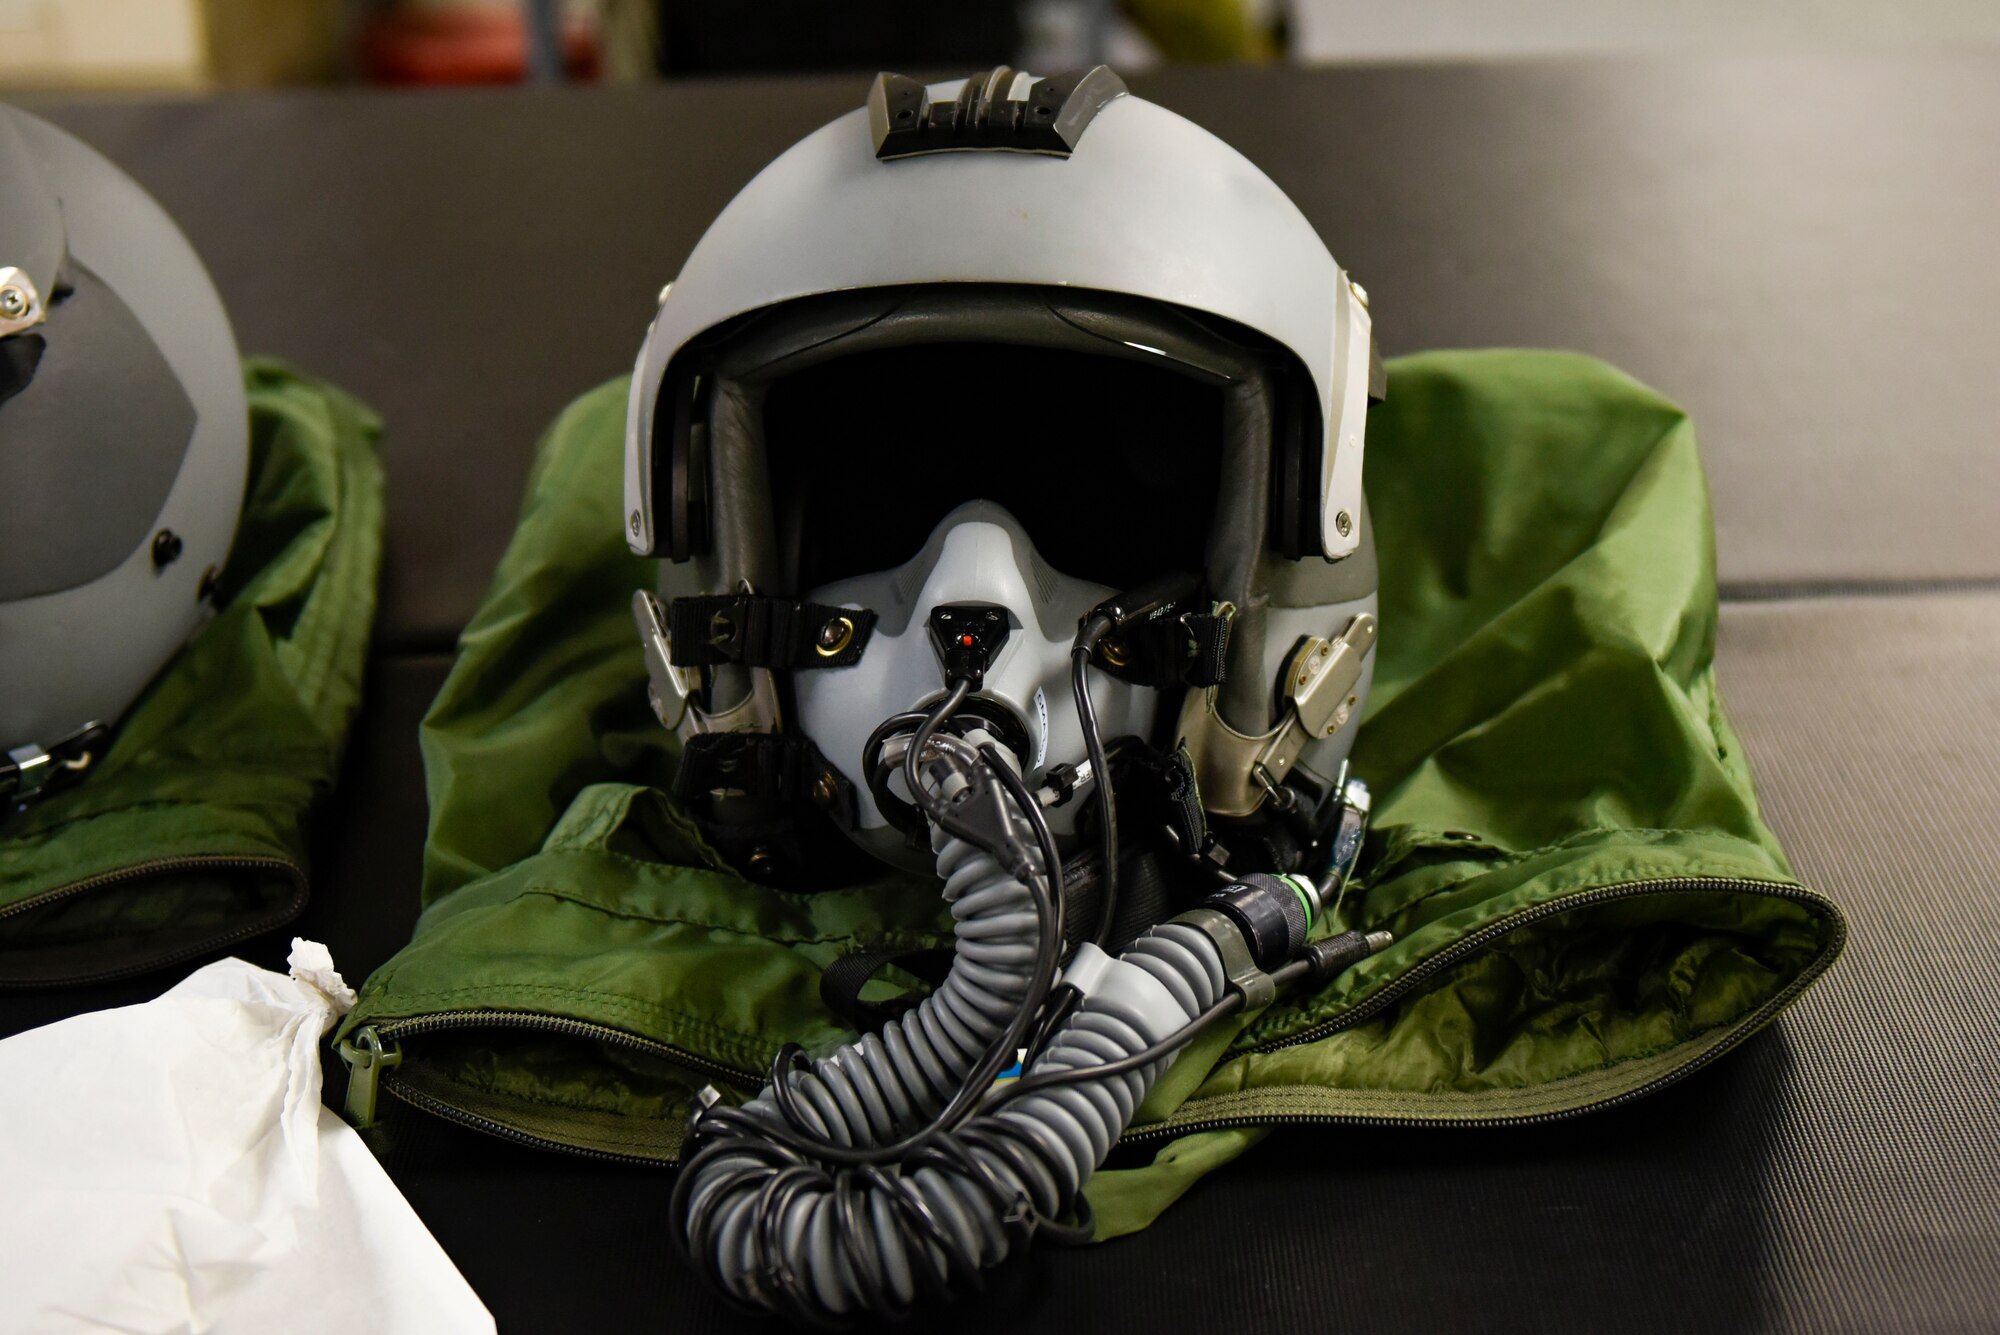 A U.S. Air Force pilot’s helmet is cleaned and repaired by 92nd Operations Support Squadron Aircrew Flight Equipment Airmen at Fairchild Air Force Base, Washington, May 3, 2022. AFE ensures mission readiness and safety by thoroughly examining and repairing essential gear. (U.S. Air Force photo by Airmen 1st Class Haiden Morris)